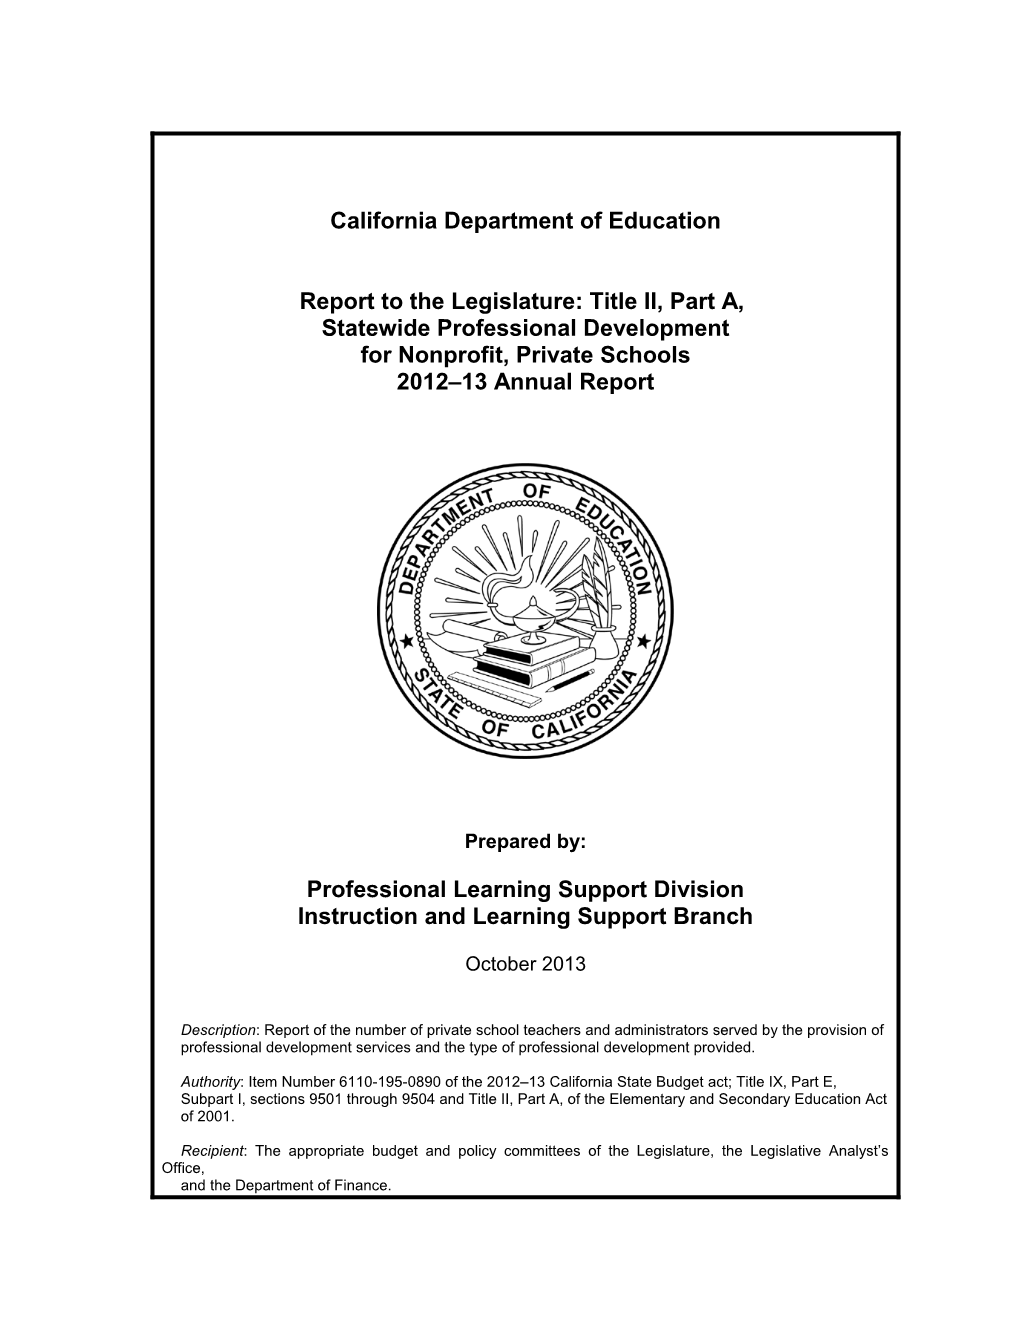 Report to the Legislature, Title II, Part a Statewide Professional Development for Nonprofit